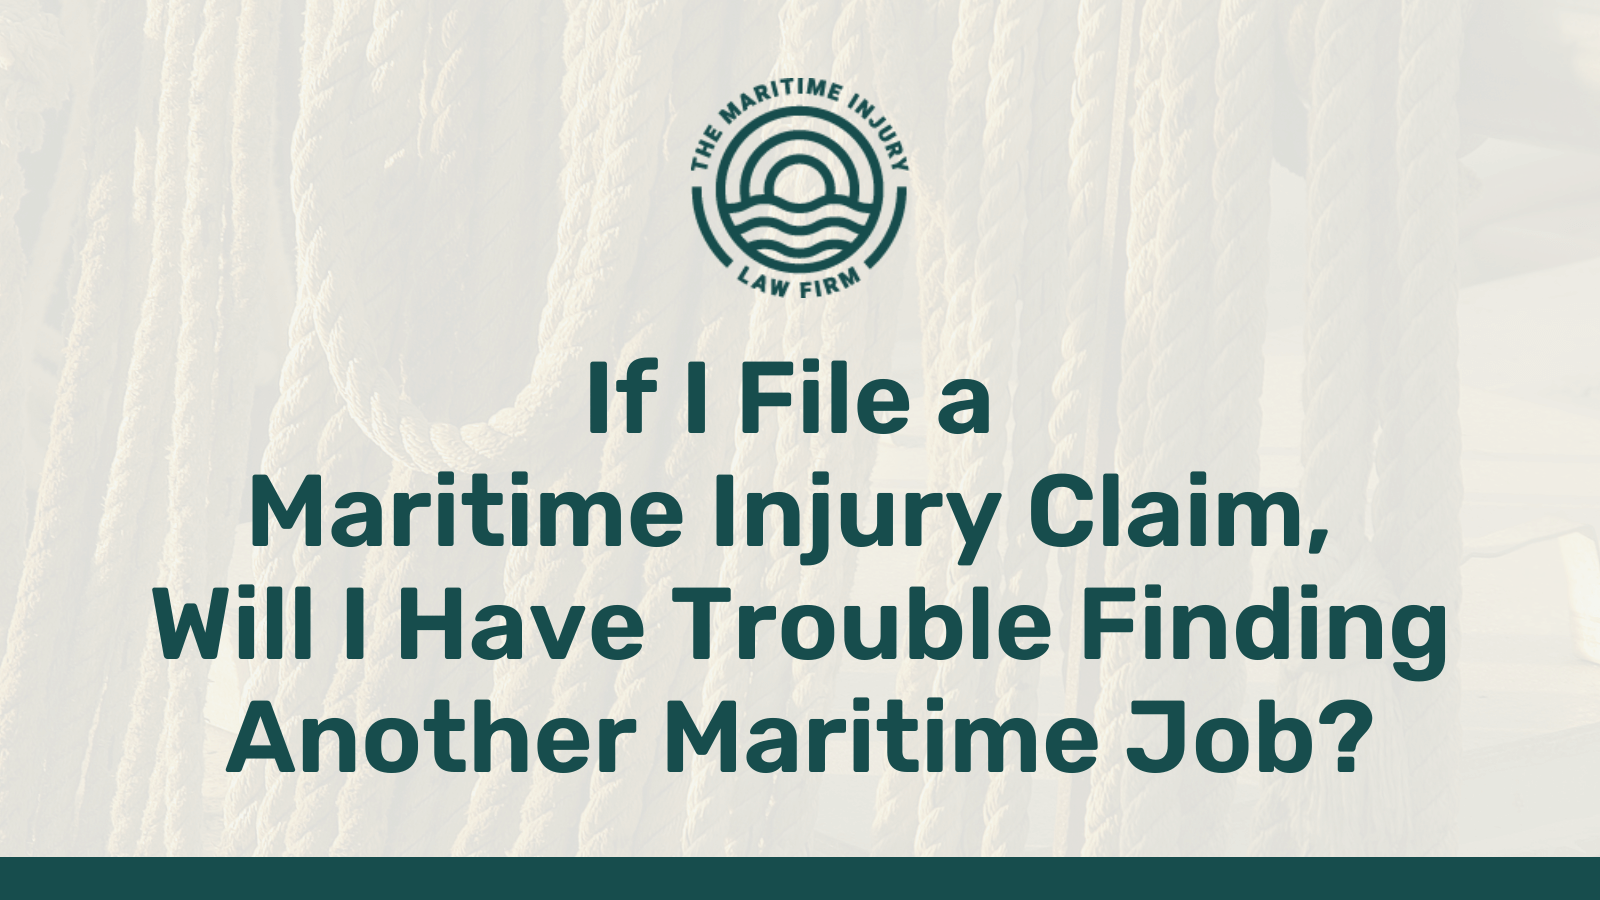 Trouble Finding Another Maritime Job - maritime injury law firm - George Vourvoulias